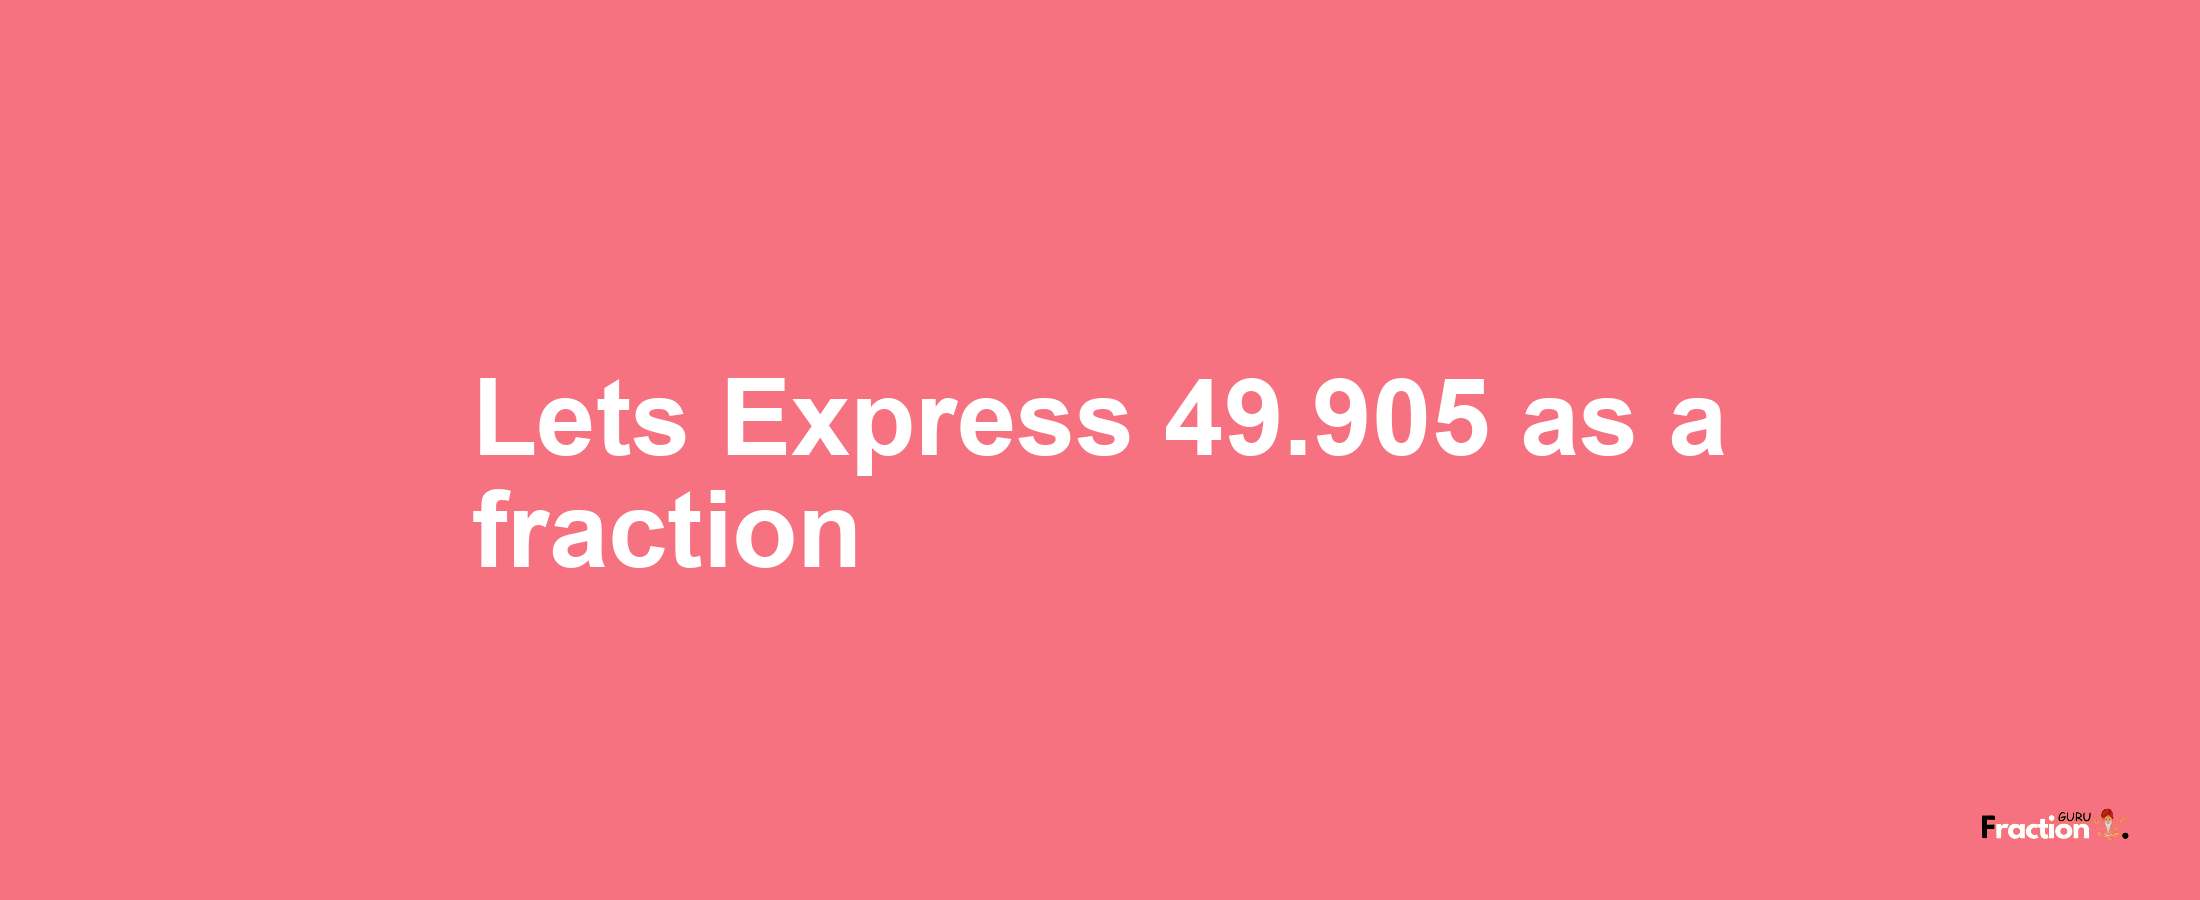 Lets Express 49.905 as afraction